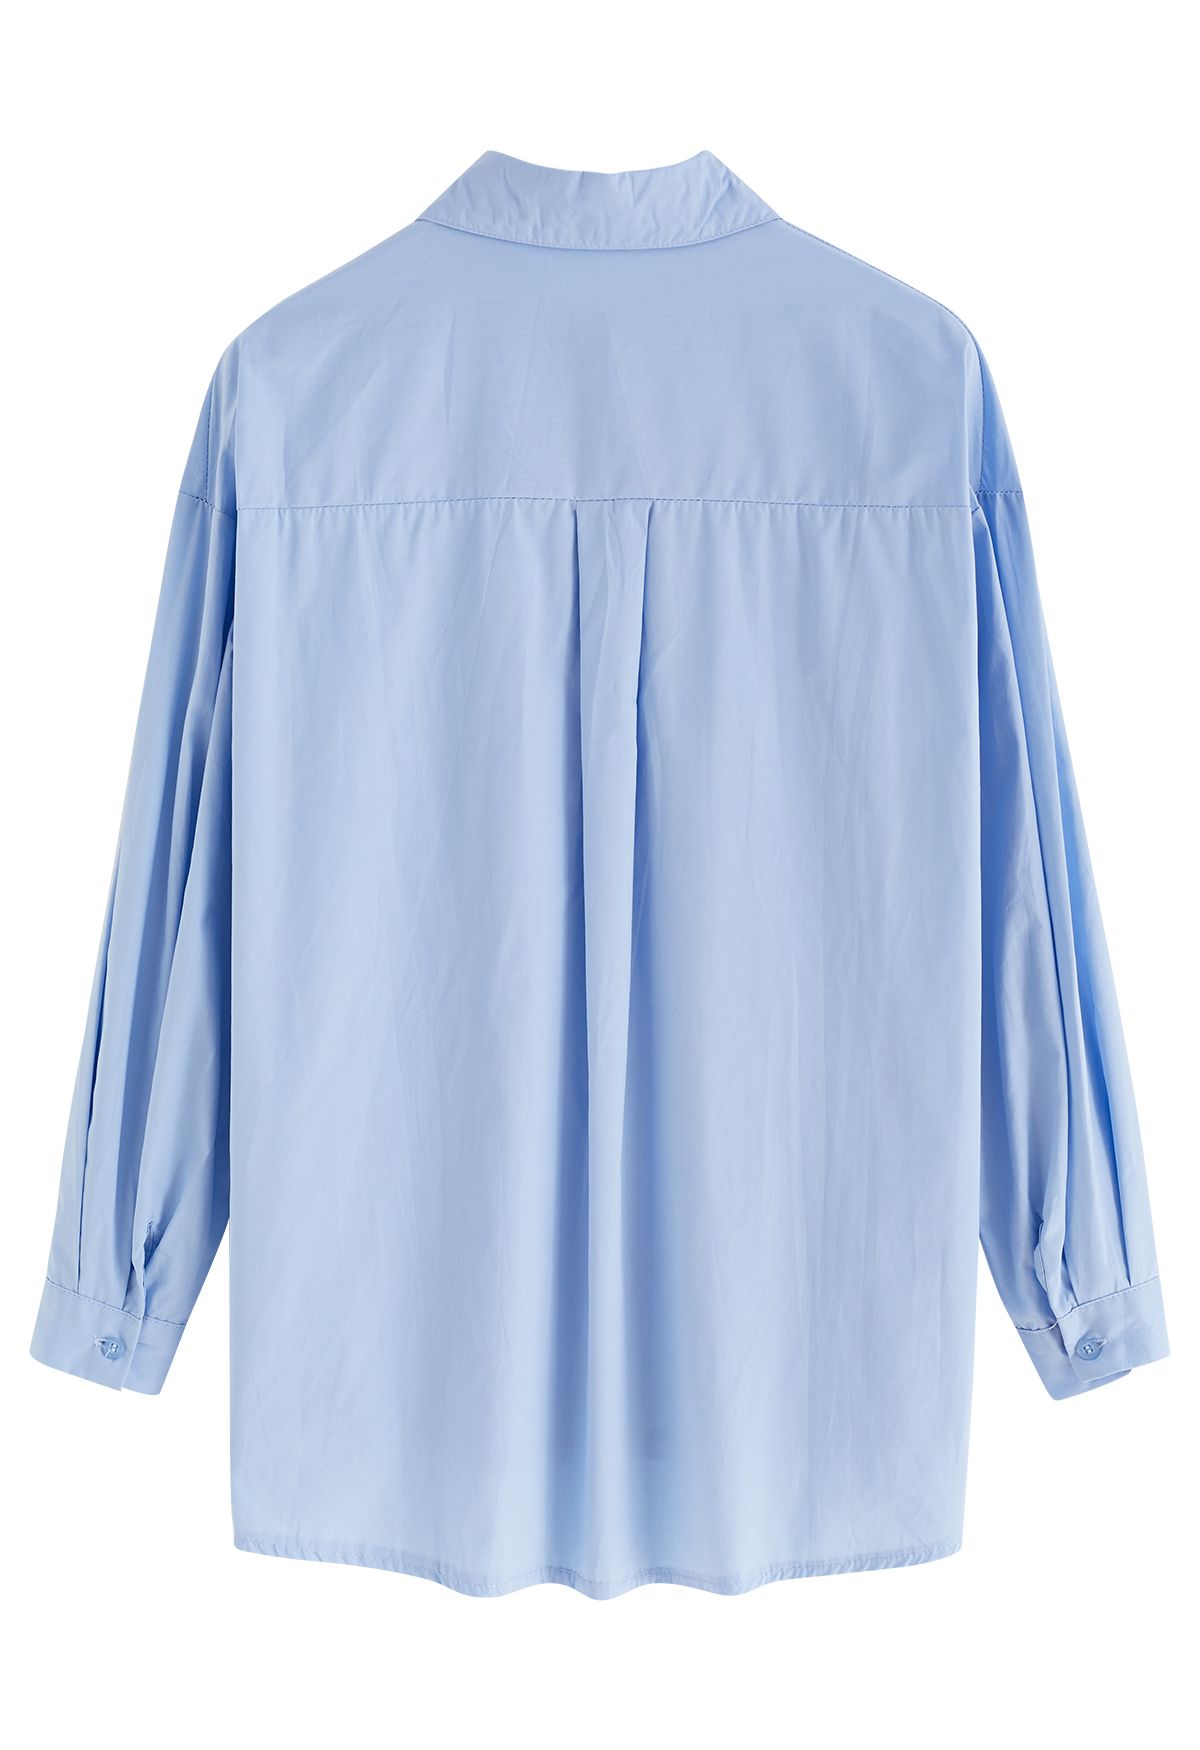 Pointed Collar Button Down Cotton Shirt in Blue